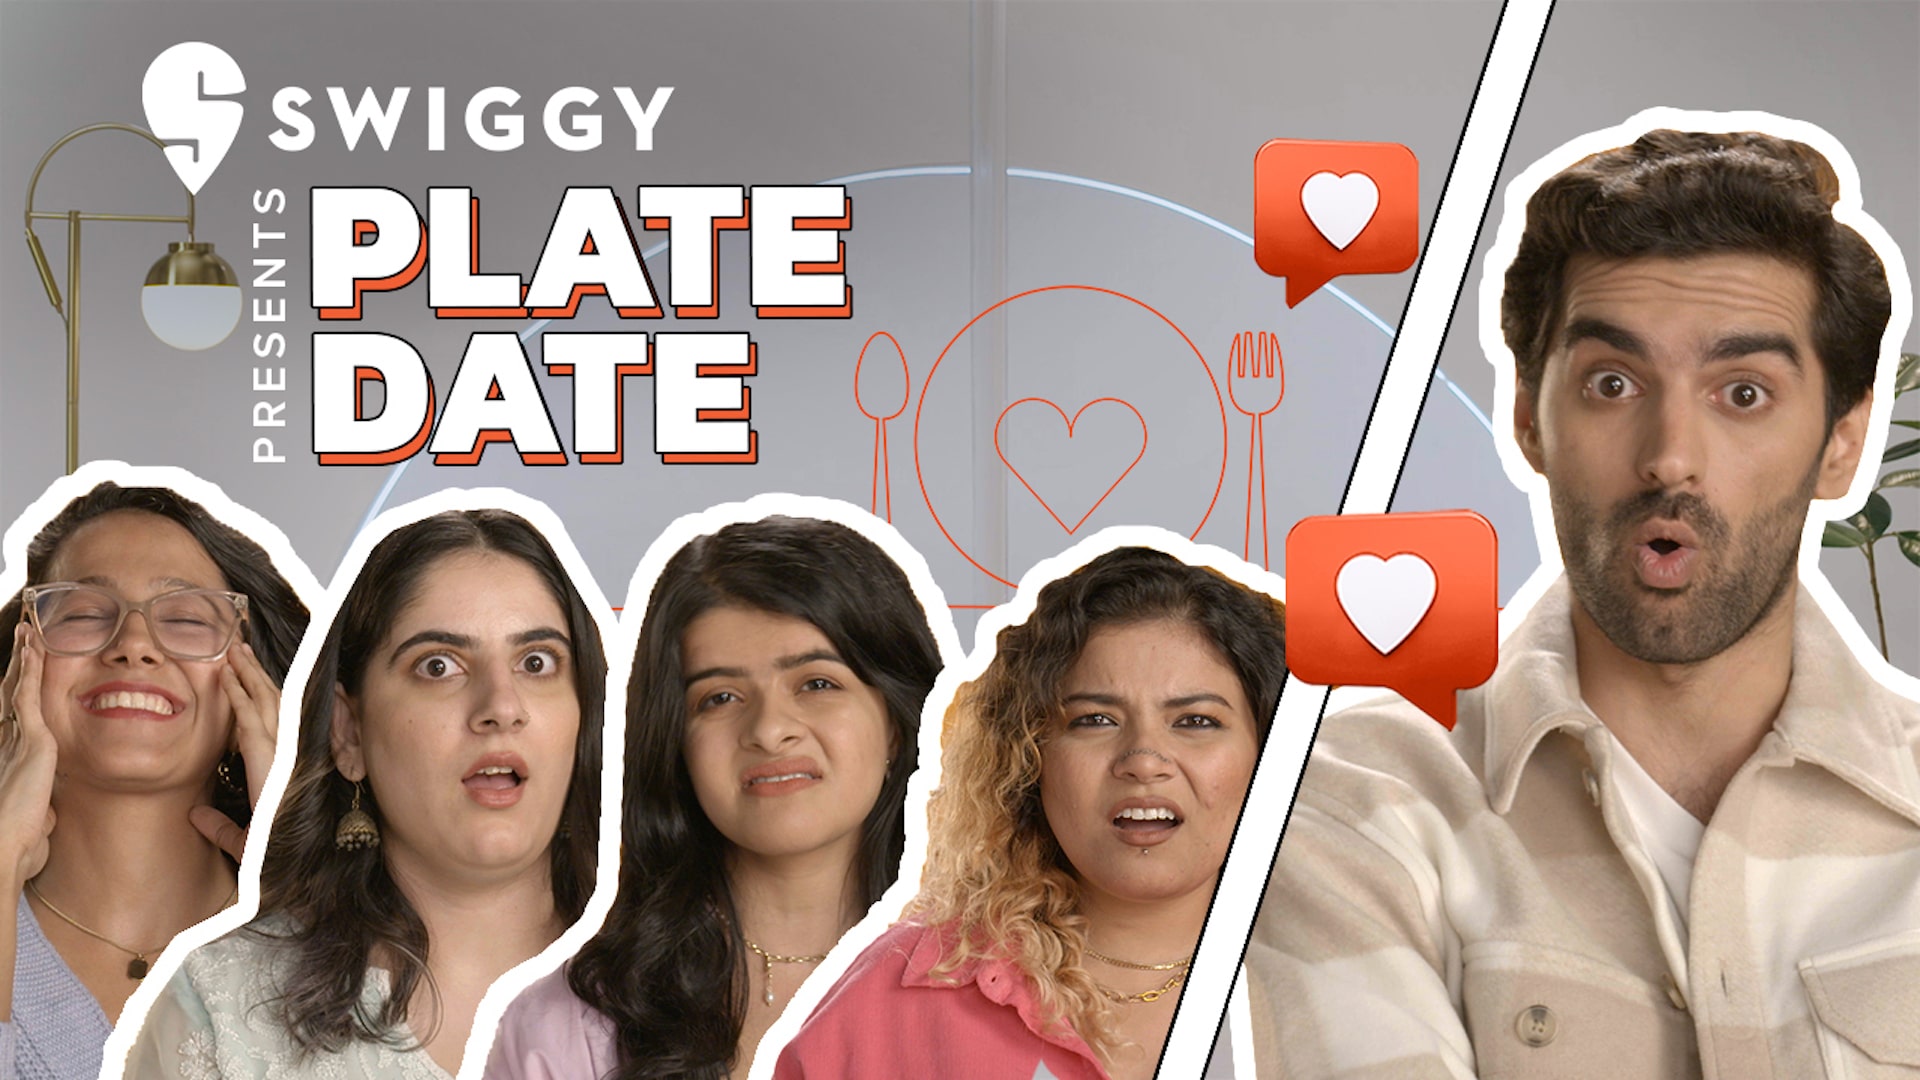 Swiggy presents ‘PLATE DATE’ to tickle your heartstrings